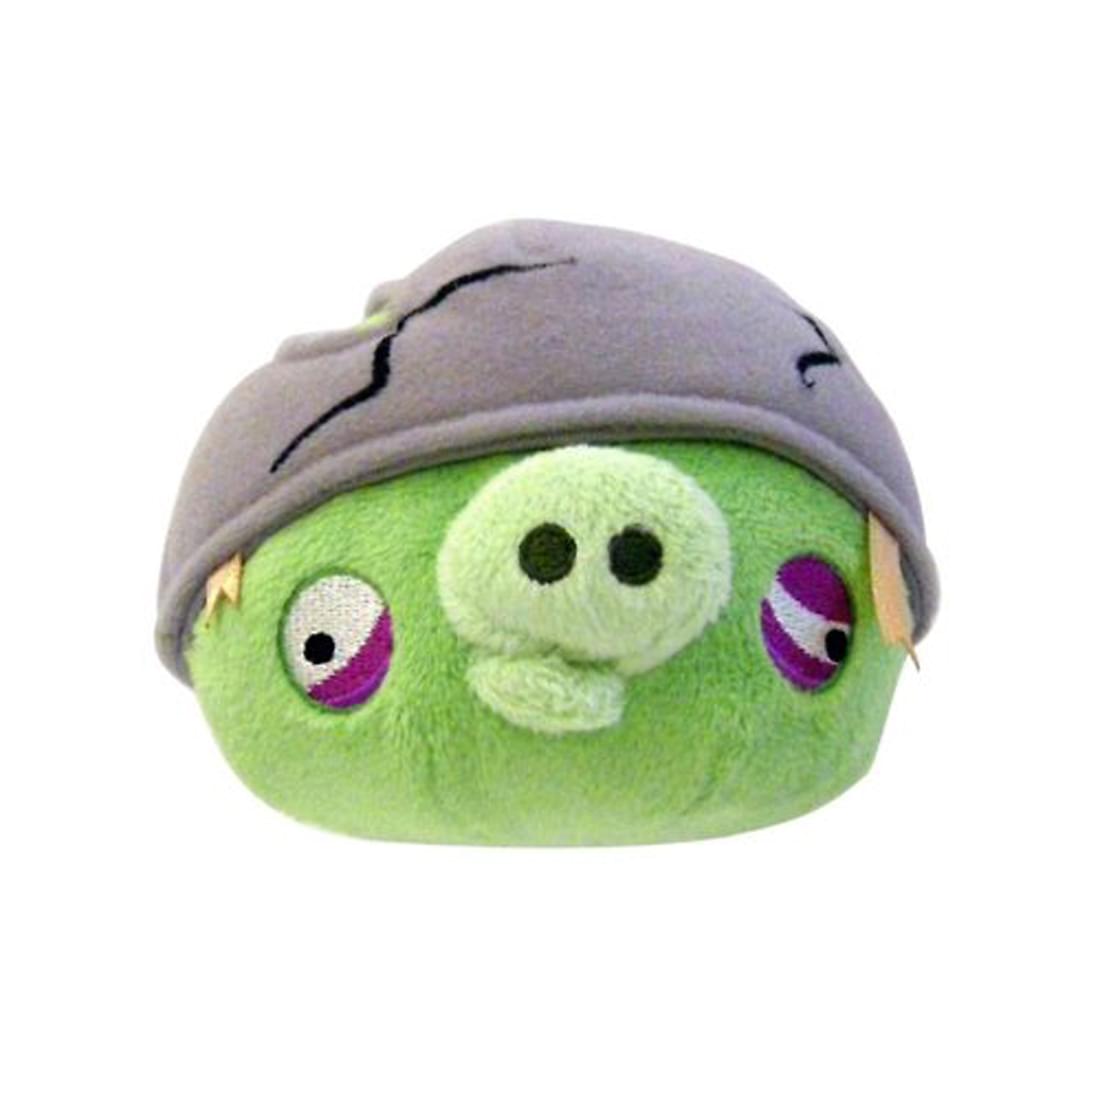 Angry Birds 8" Helmet Pig Plush Officially Licensed